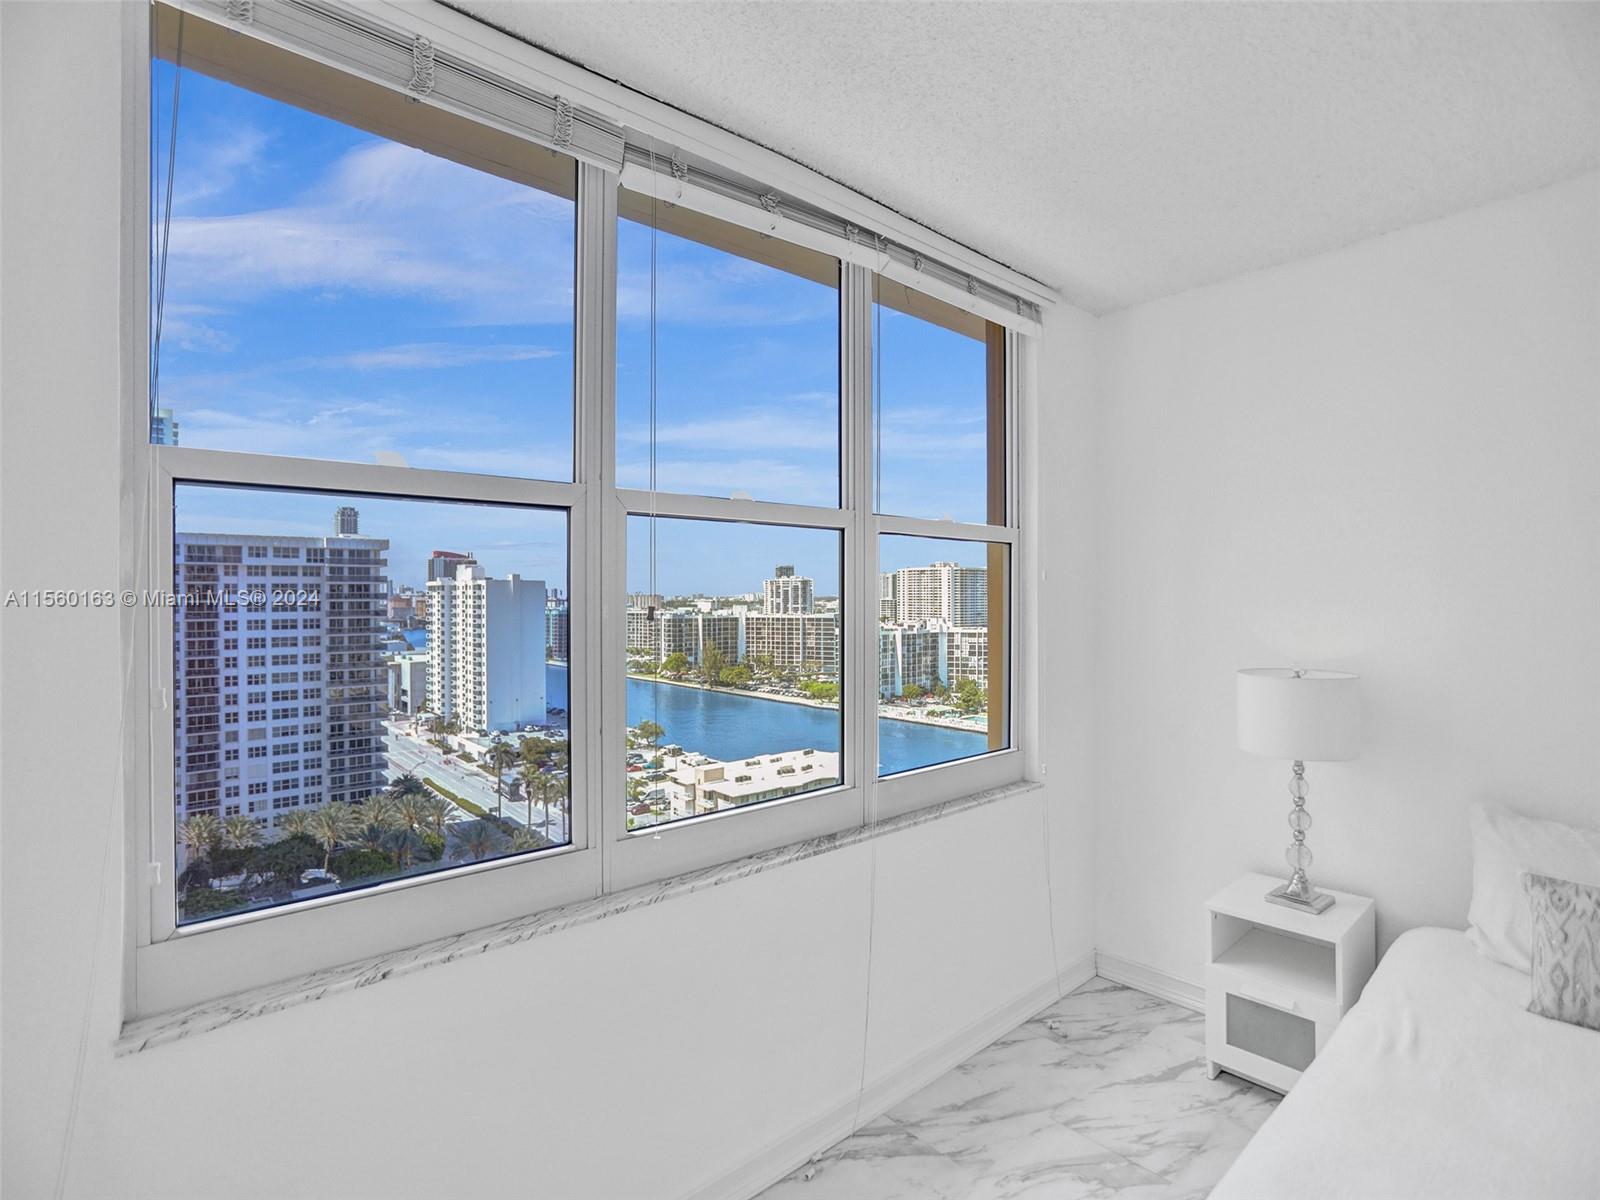 Photo of 2501 S Ocean Dr #1633 in Hollywood, FL